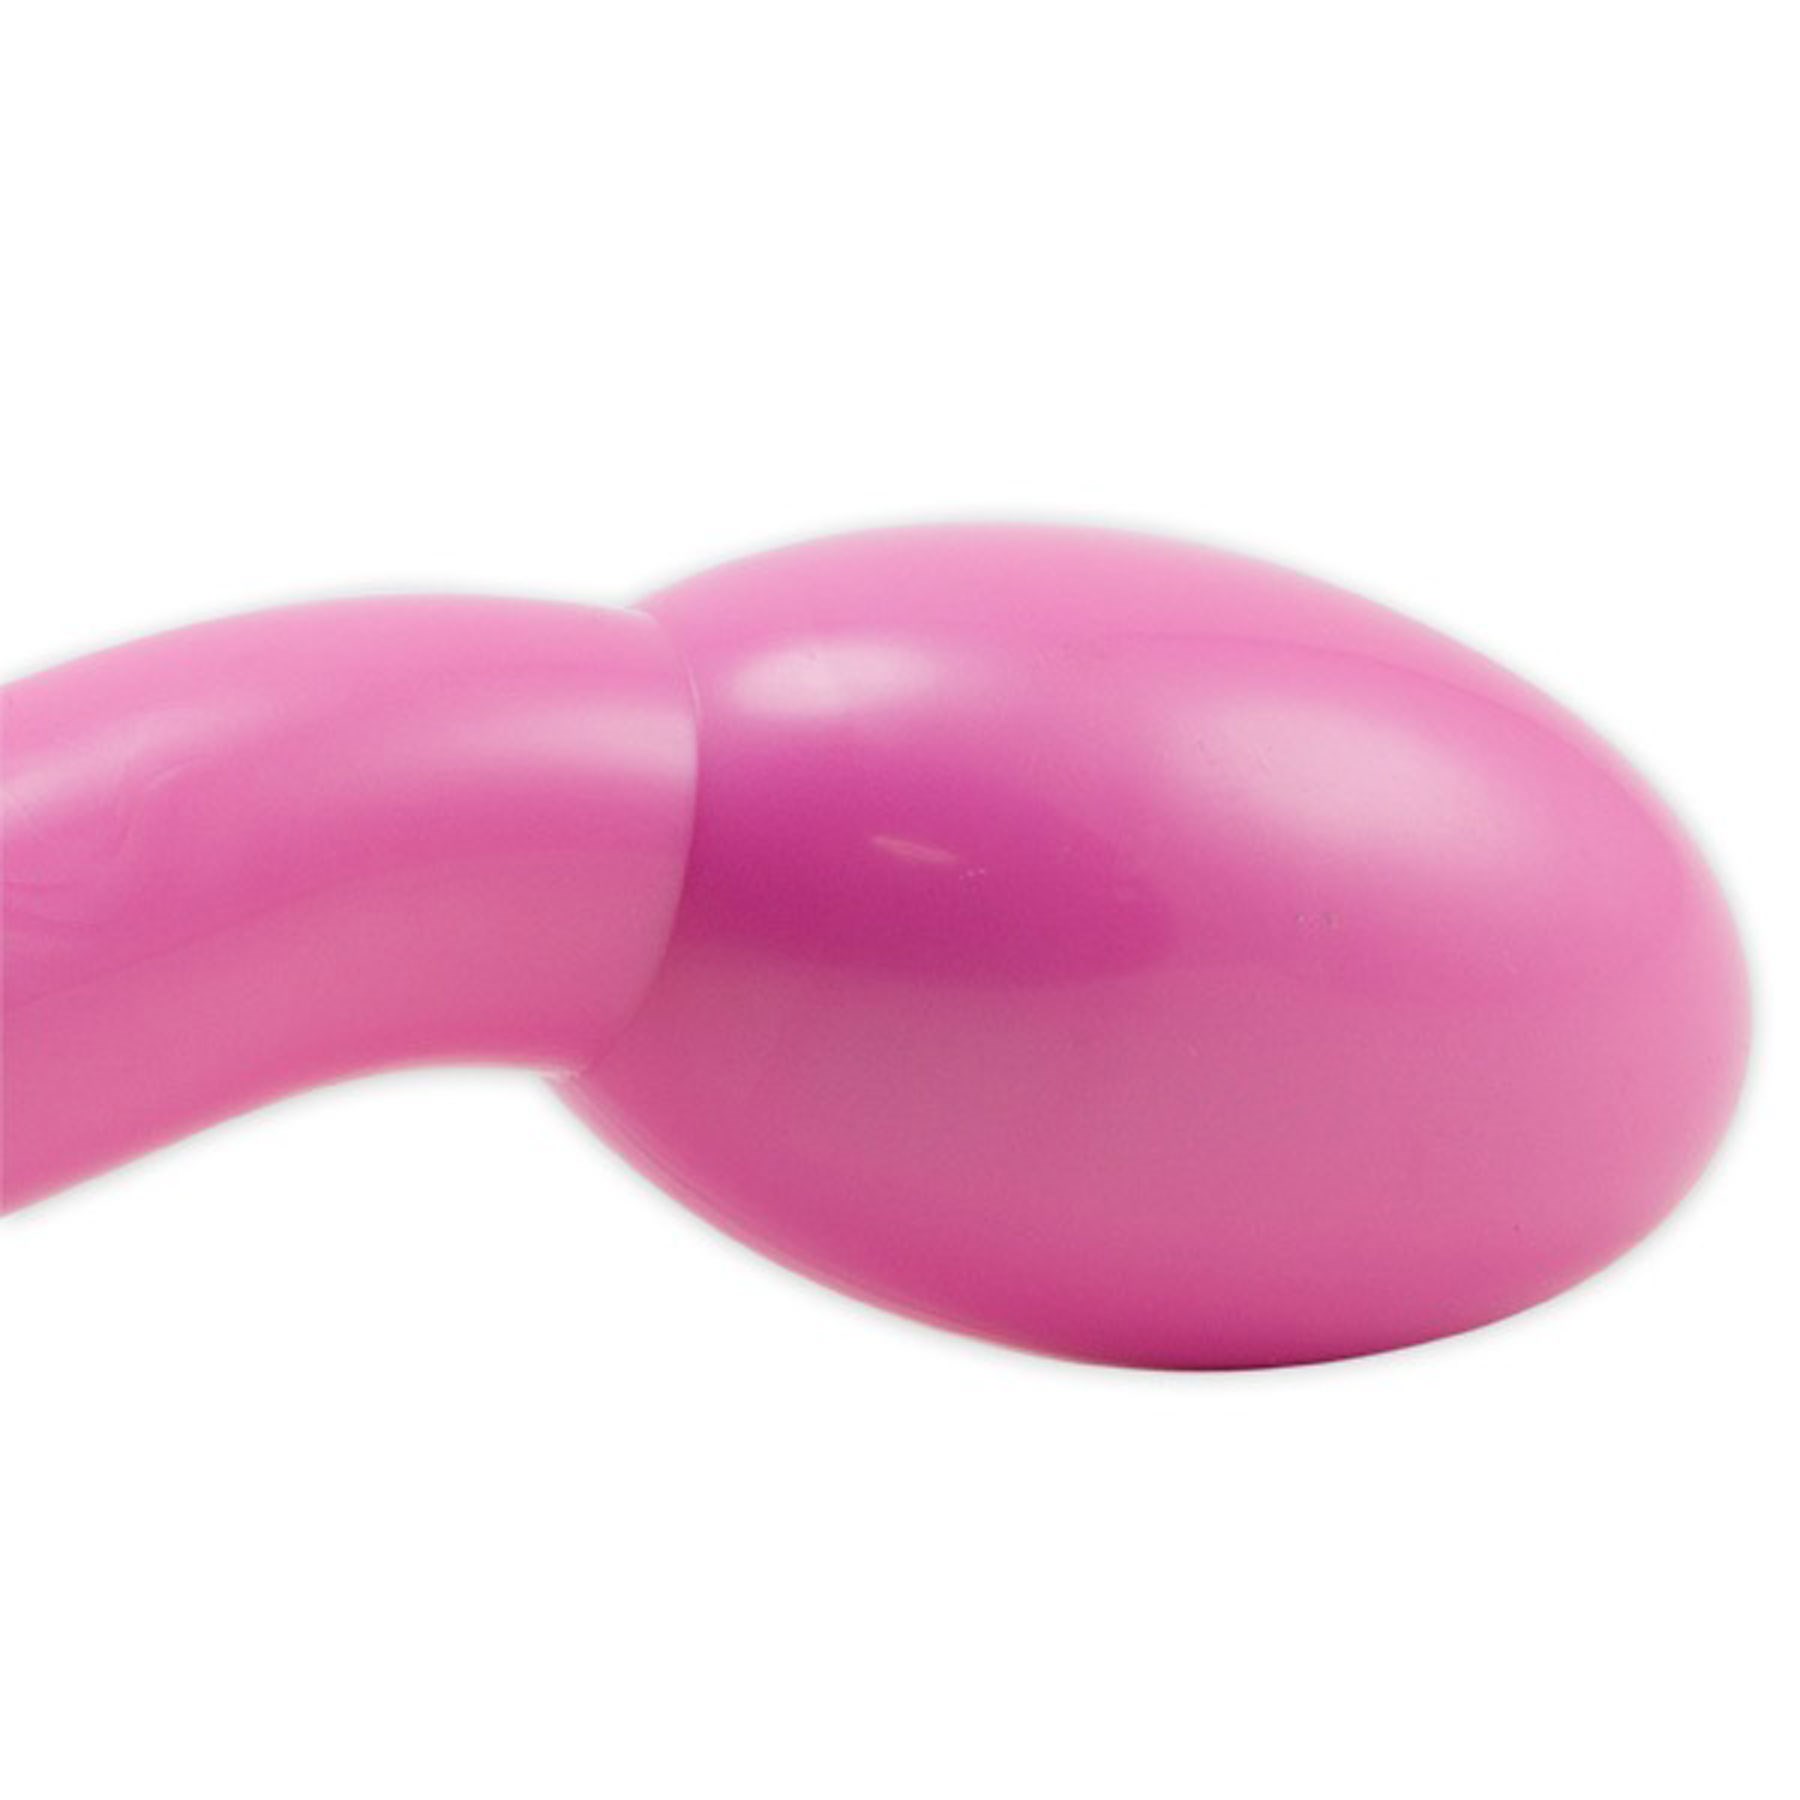 Adam & Eve G-Gasm Delight G-Spot Vibe close up of curve in vibe